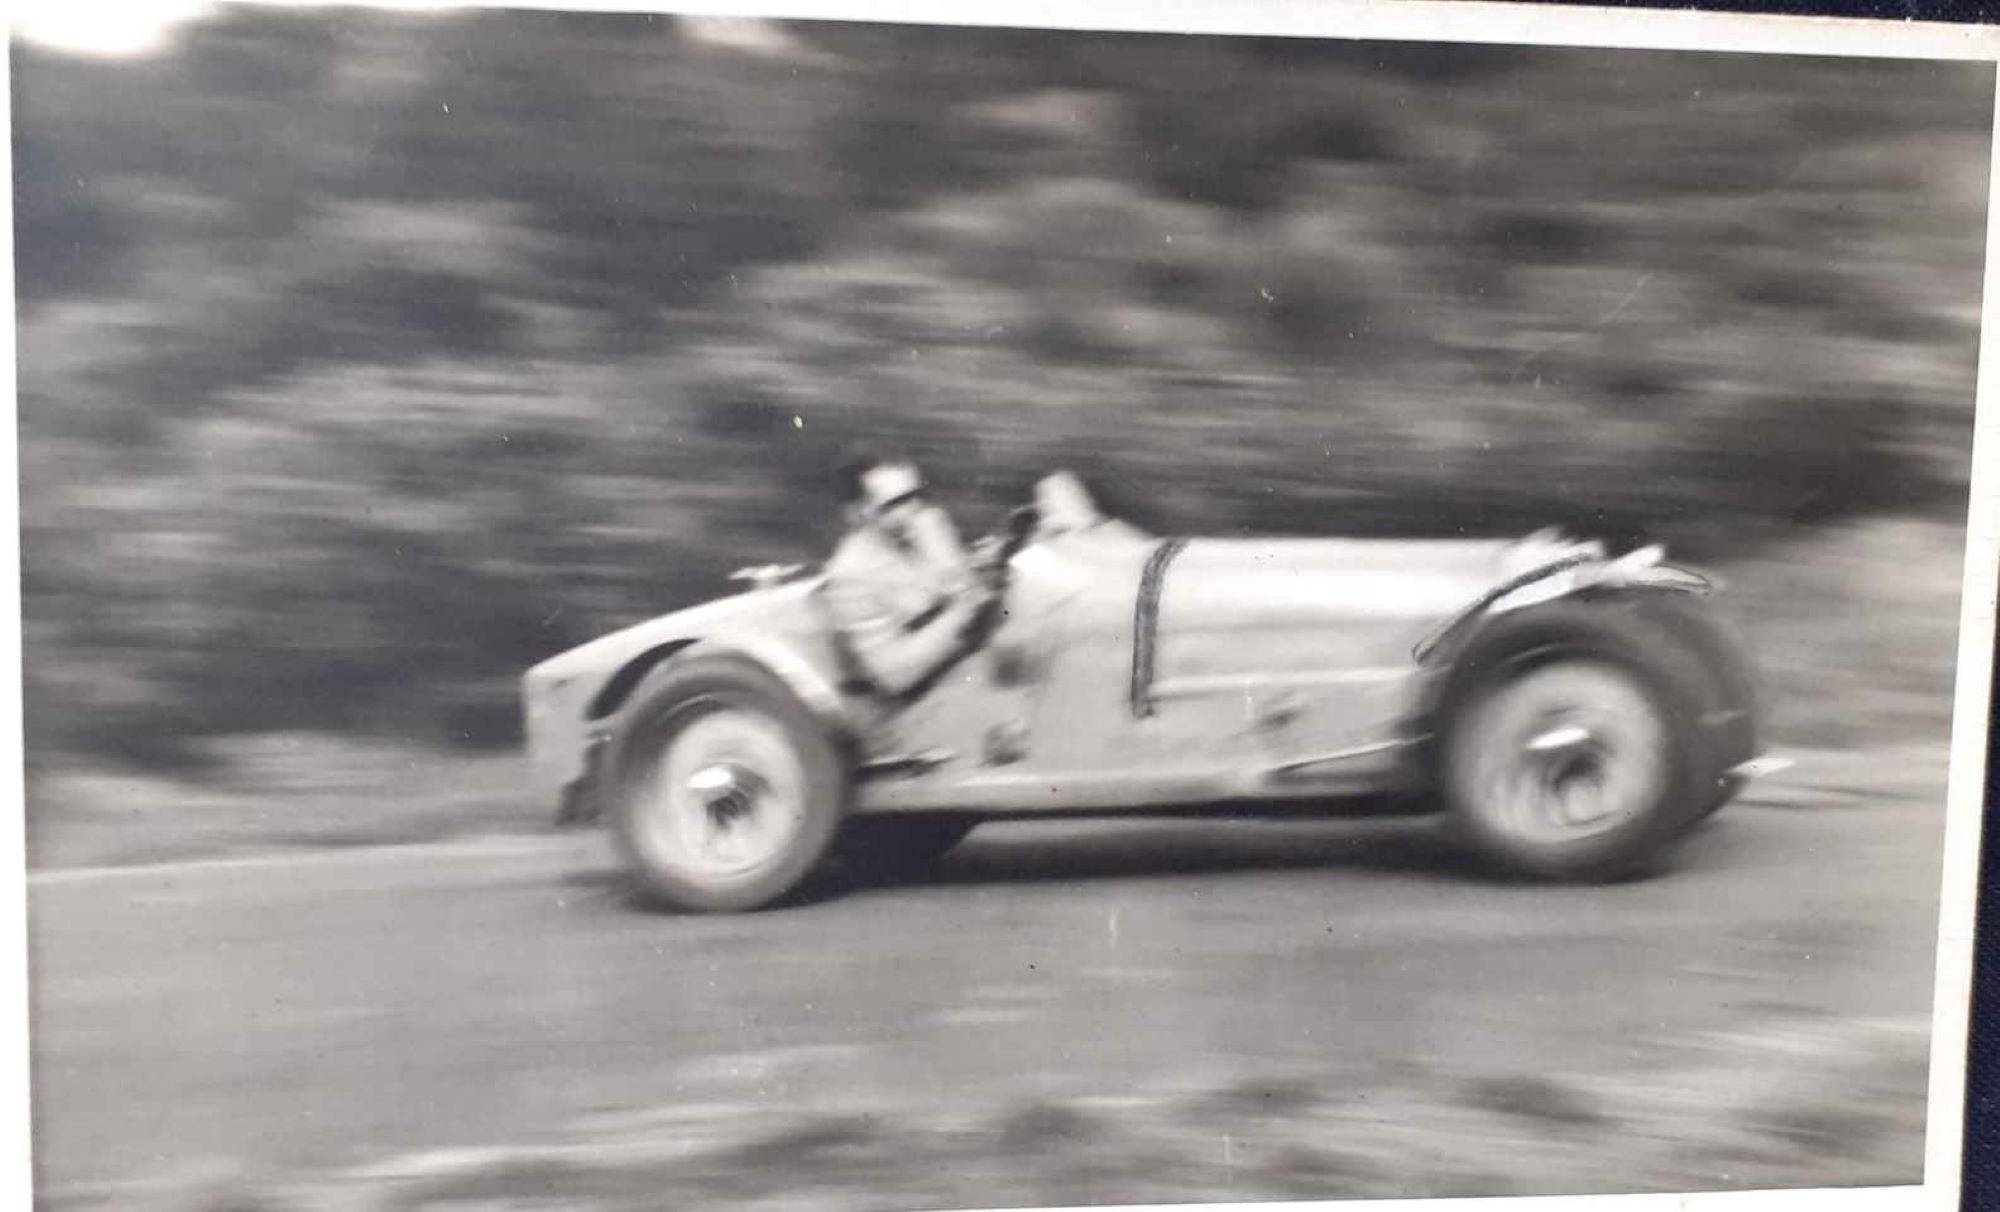 Name:  NSCC 1950 #0116 Bugatti T35 at speed - light colour 1950's - image Graeme Wells arch Anthony Wel.jpg
Views: 189
Size:  158.1 KB